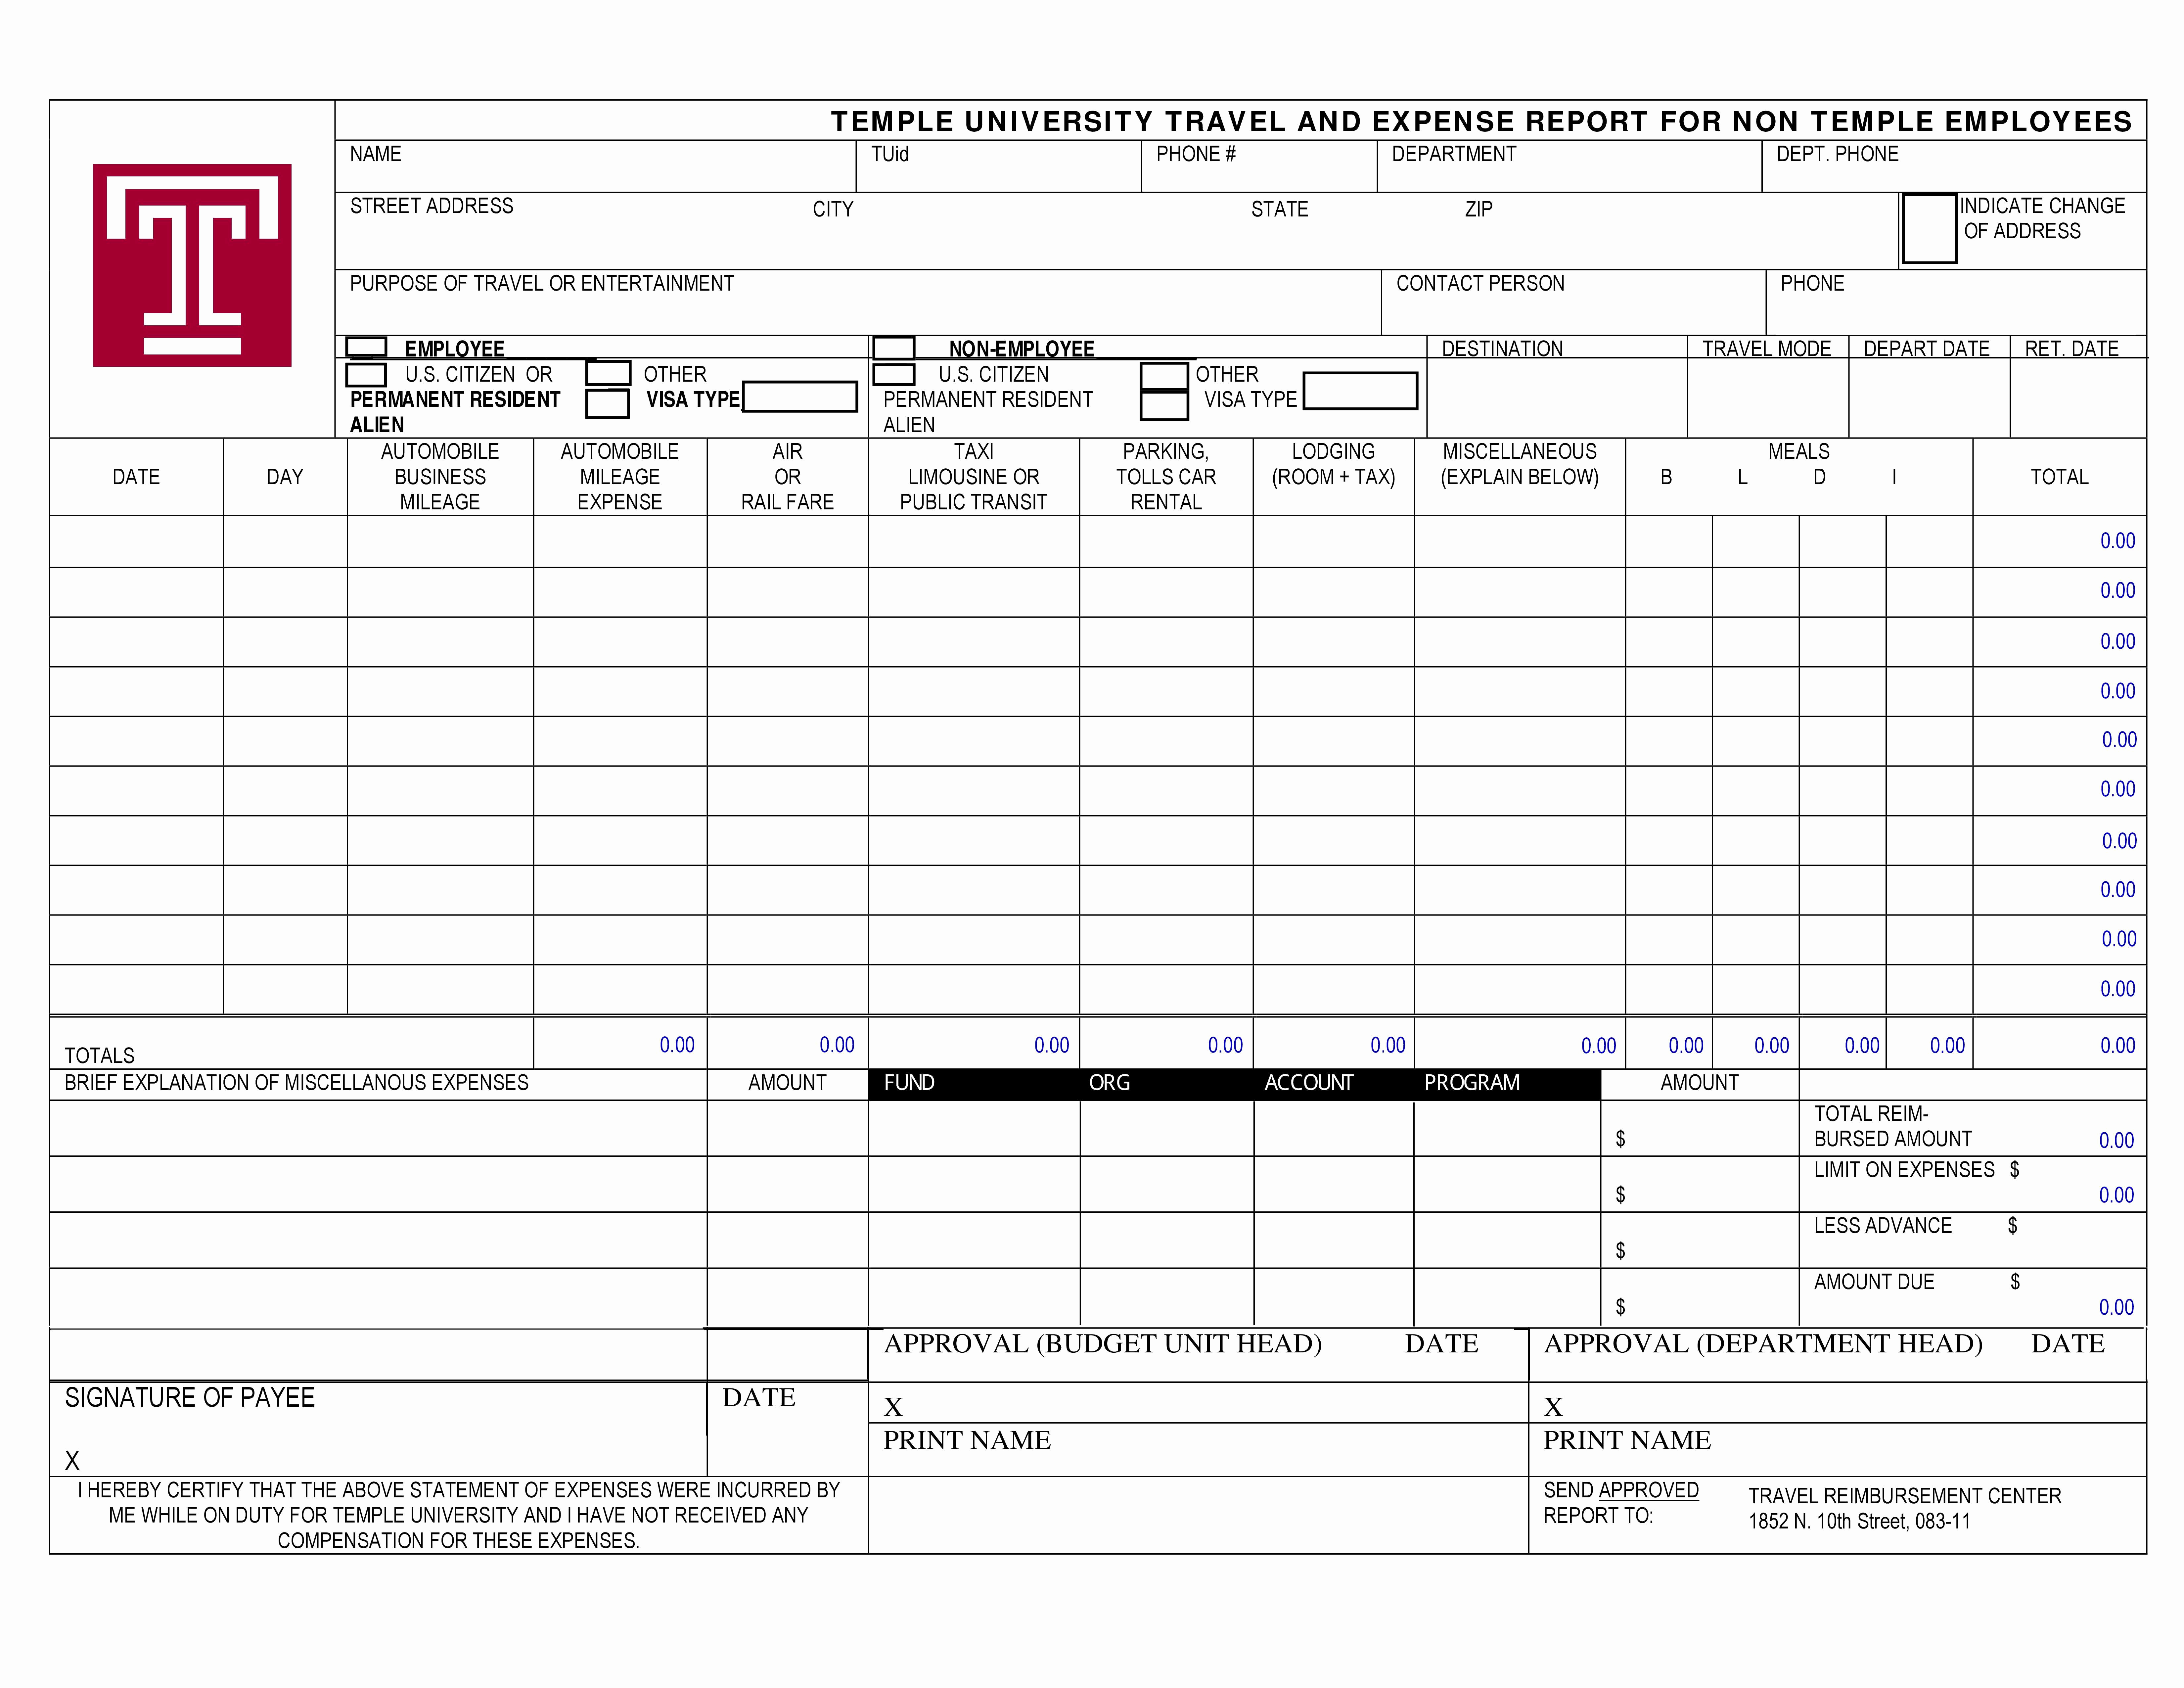 Expense Report Template Free Inspirational 40 Expense Report Templates to Help You Save Money